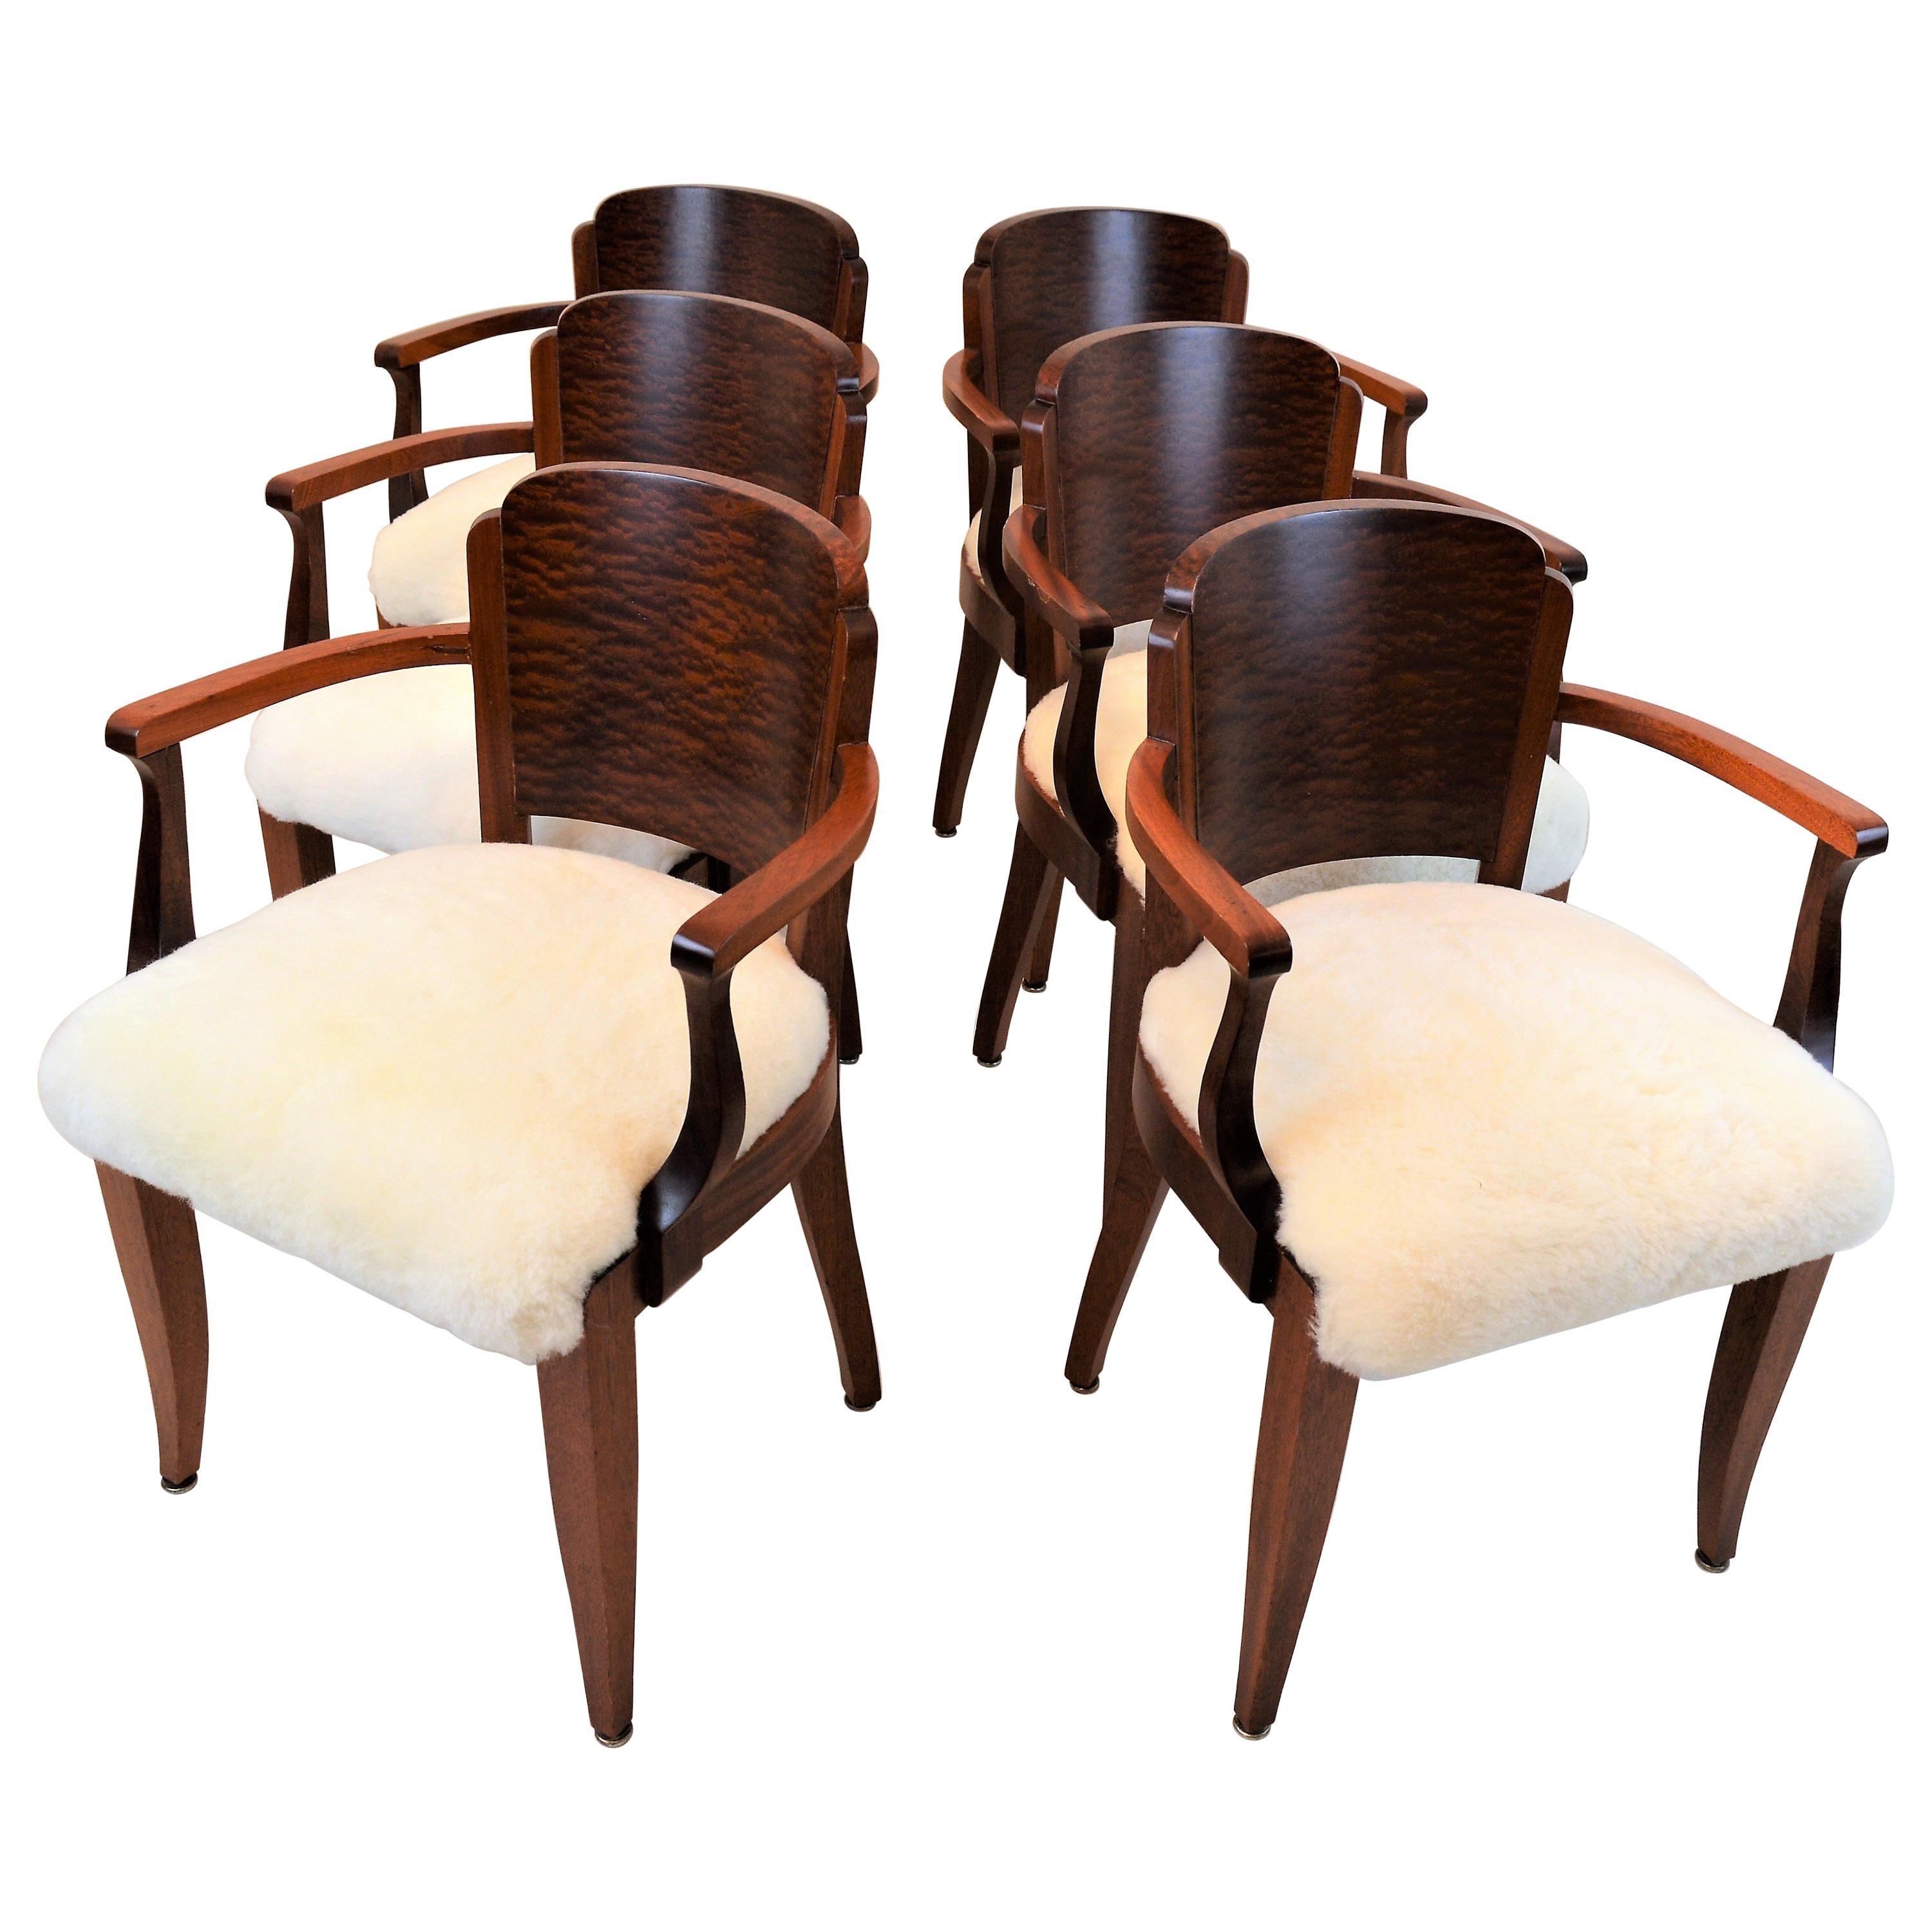 Gaston Poisson Art Deco Armchairs Covered with Sheepskin in Solid Mahogany